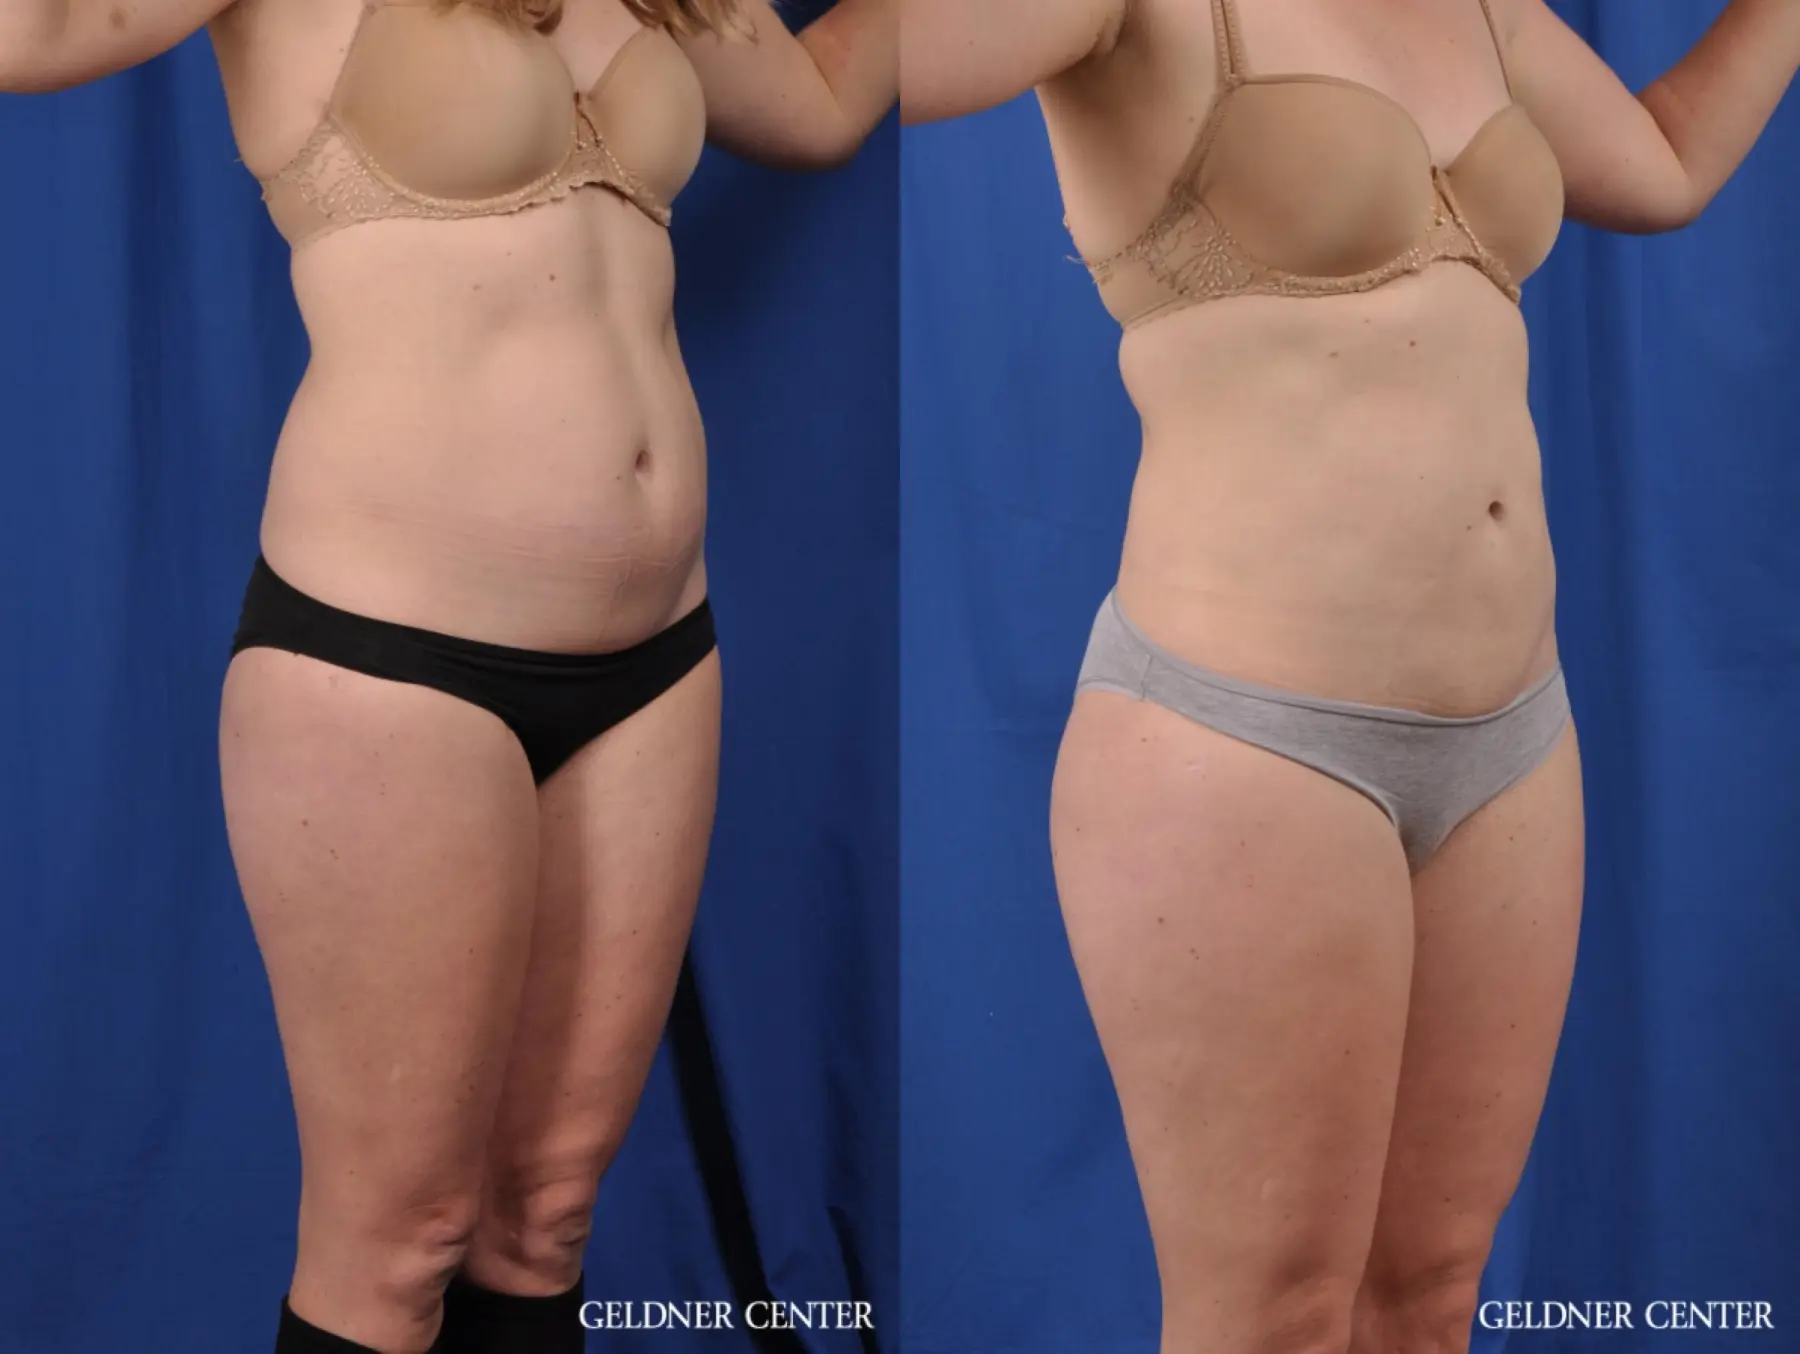 Liposuction: Patient 48 - Before and After 2